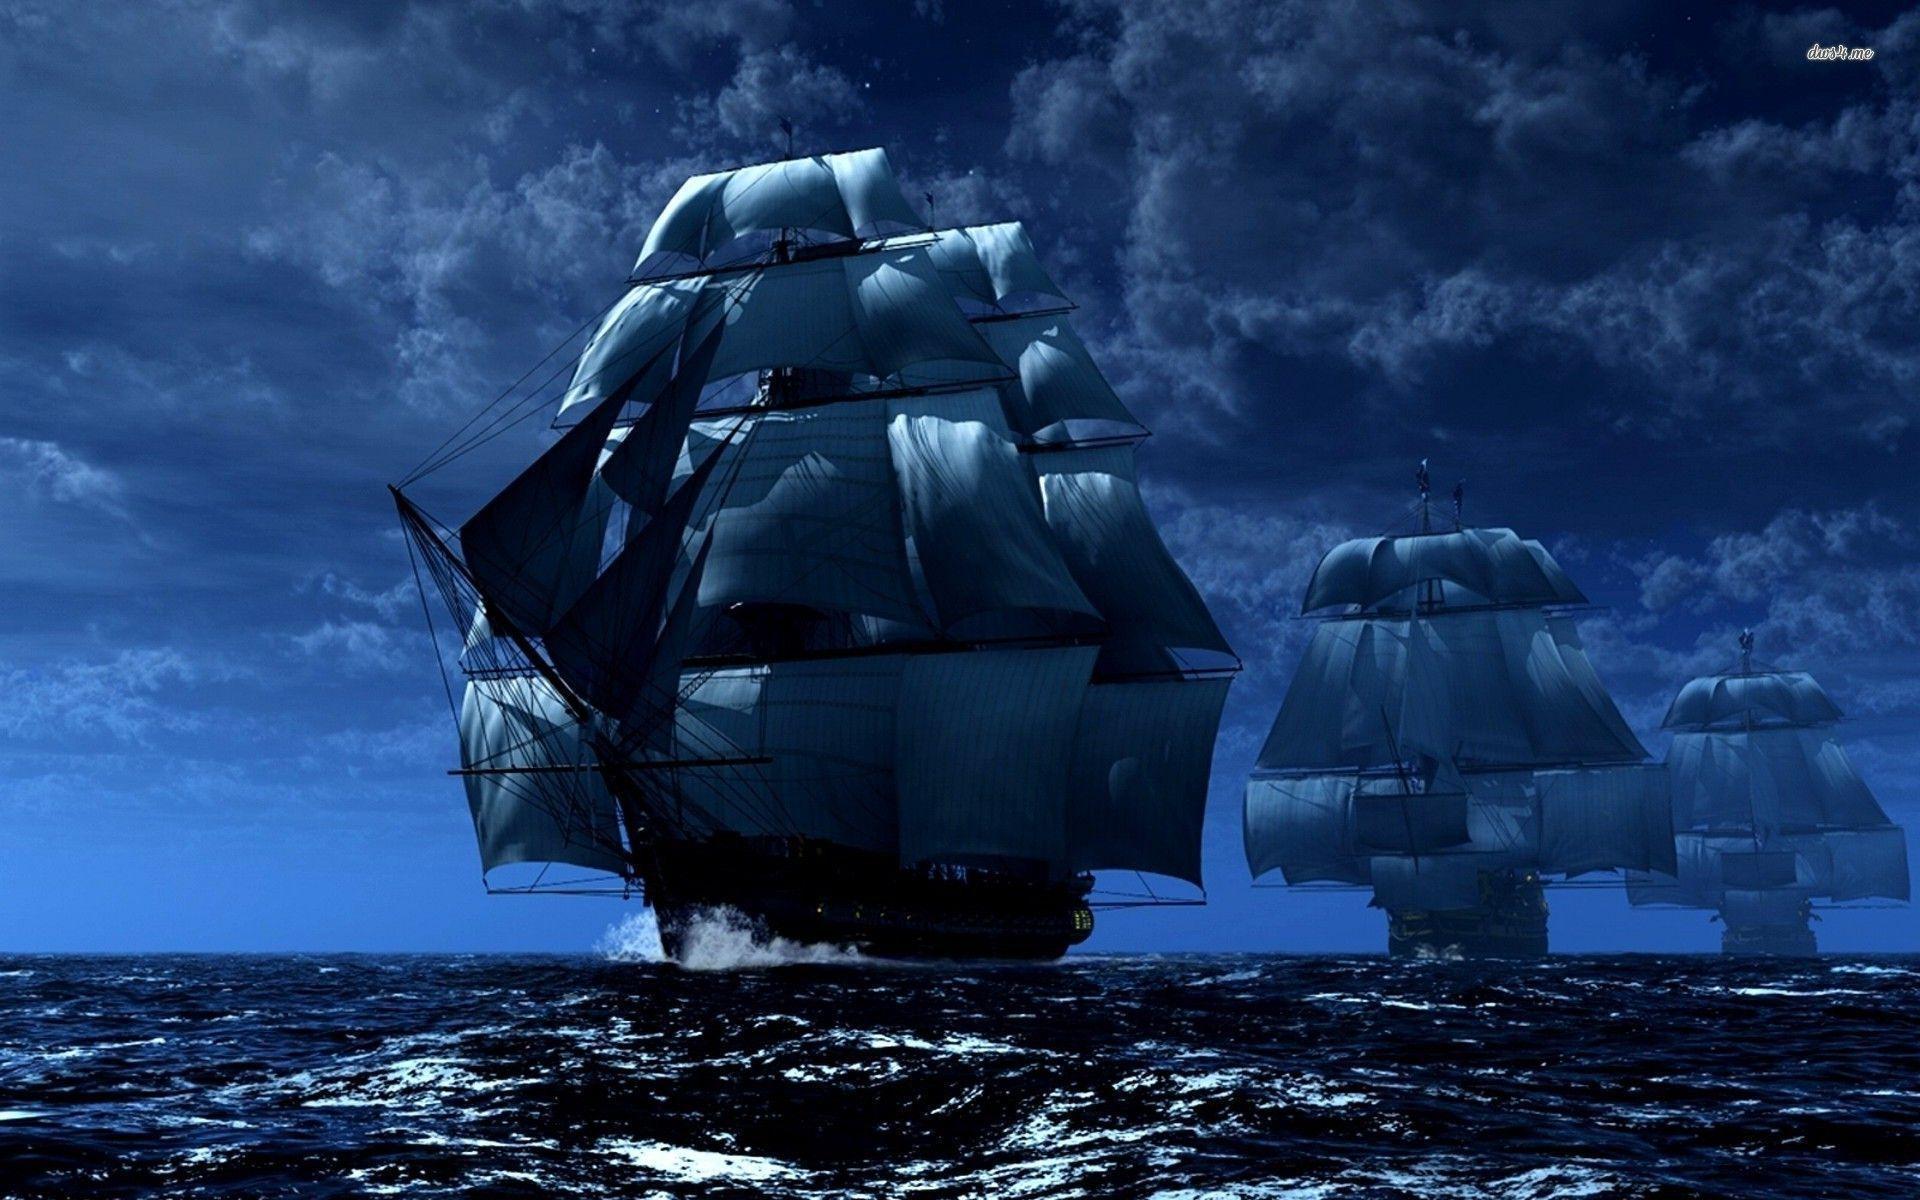 Pirate Ship Backgrounds